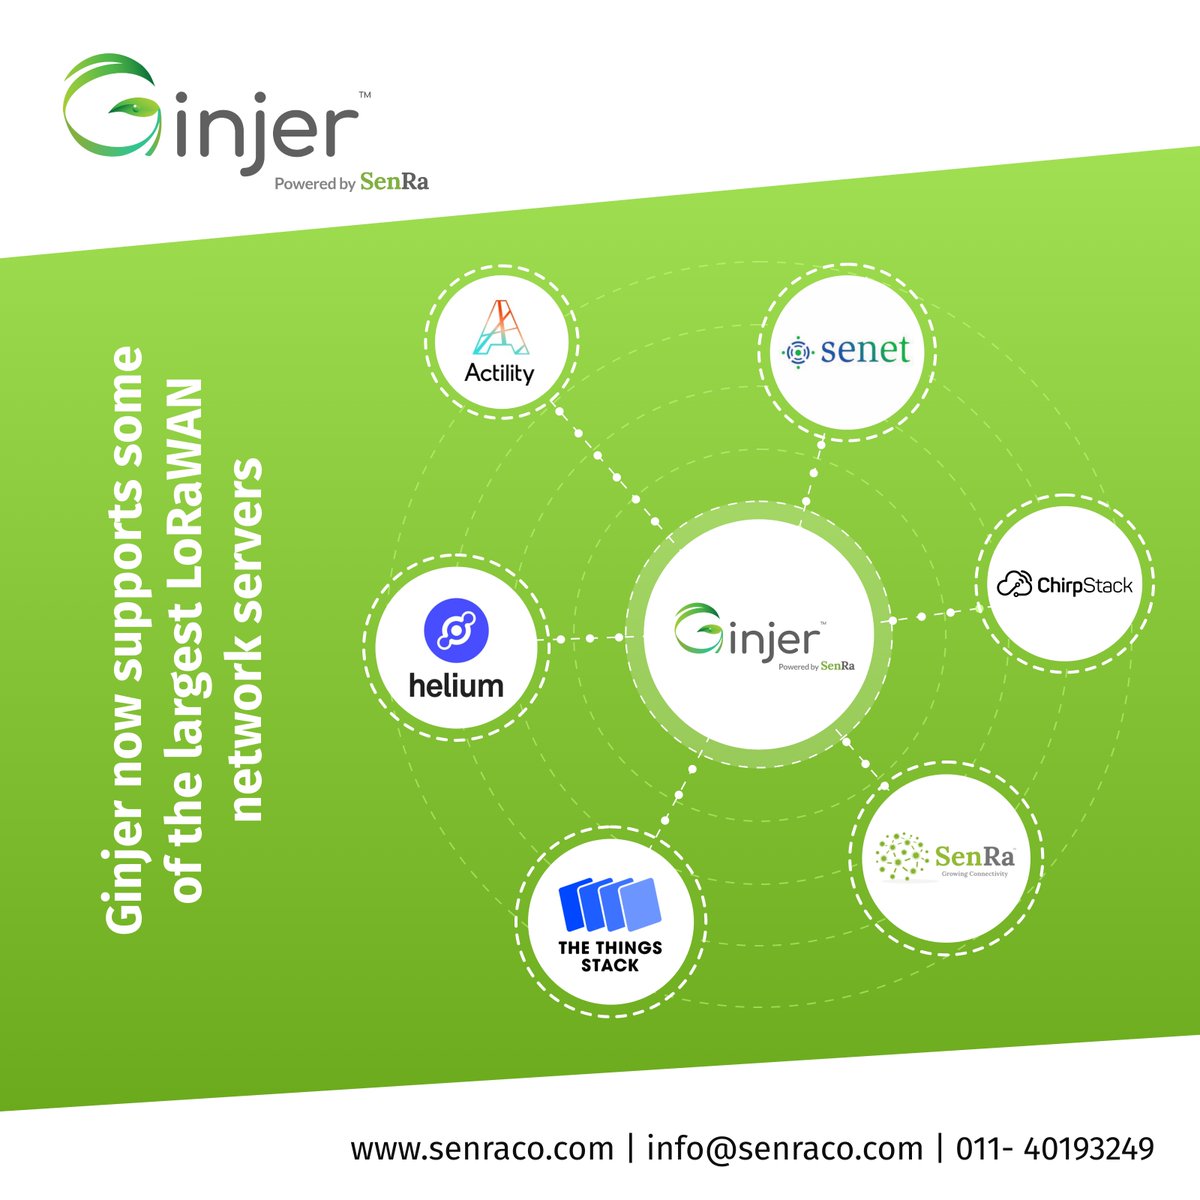 Unlock the full potential of your #IoT data with #Ginjer. Our platform is built to seamlessly integrate with some of the largest #LoRaWAN network servers like @senetco, @Actility, @thethingsntwrk, @helium & more. Create your account now at ginjer.io @LoRaAlliance